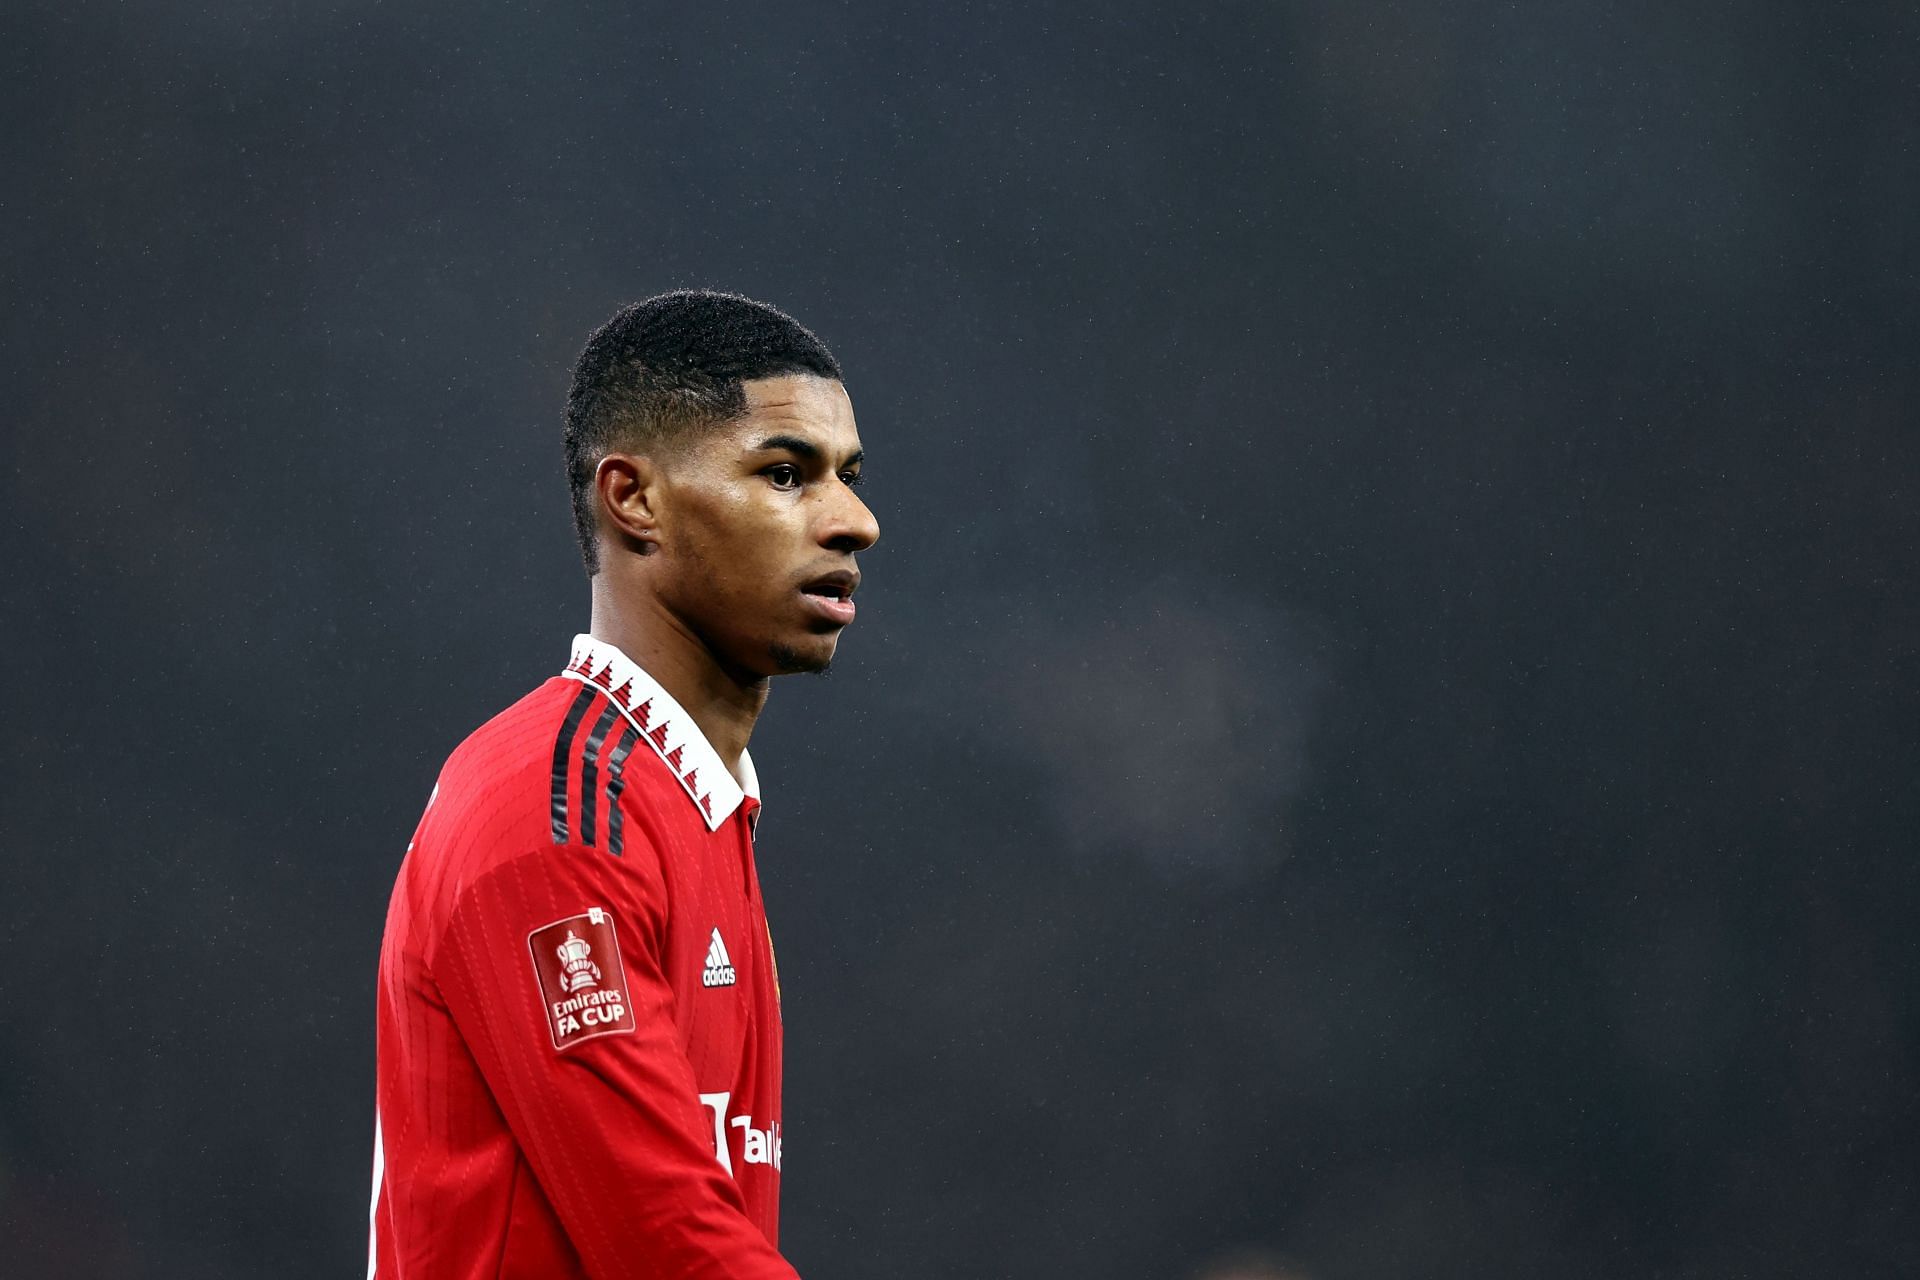 Marcus Rashford has generated a stir with his recent form.